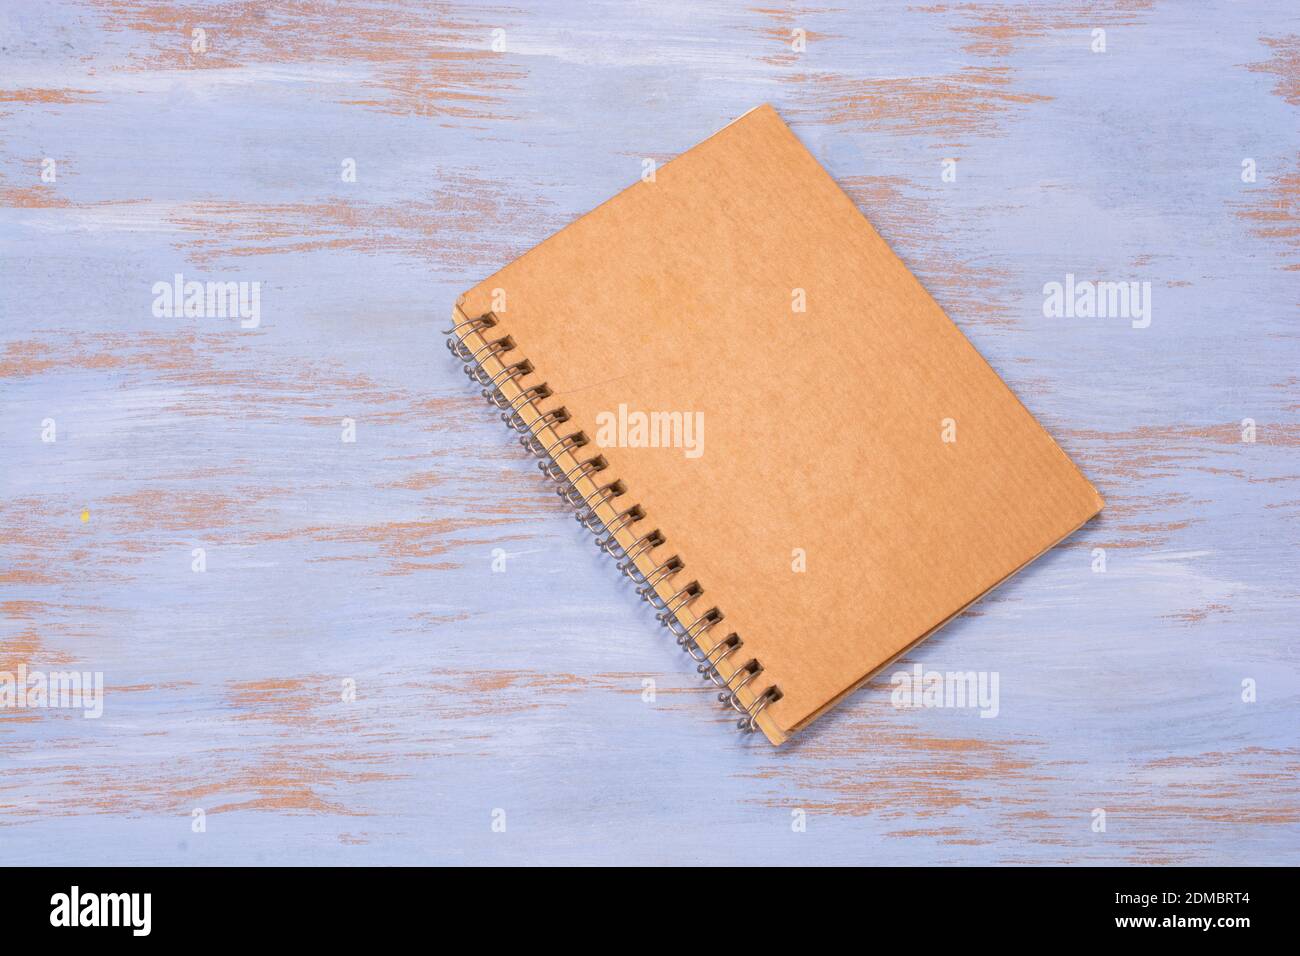 A cardboard notebook cover on a blue wooden surface Stock Photo